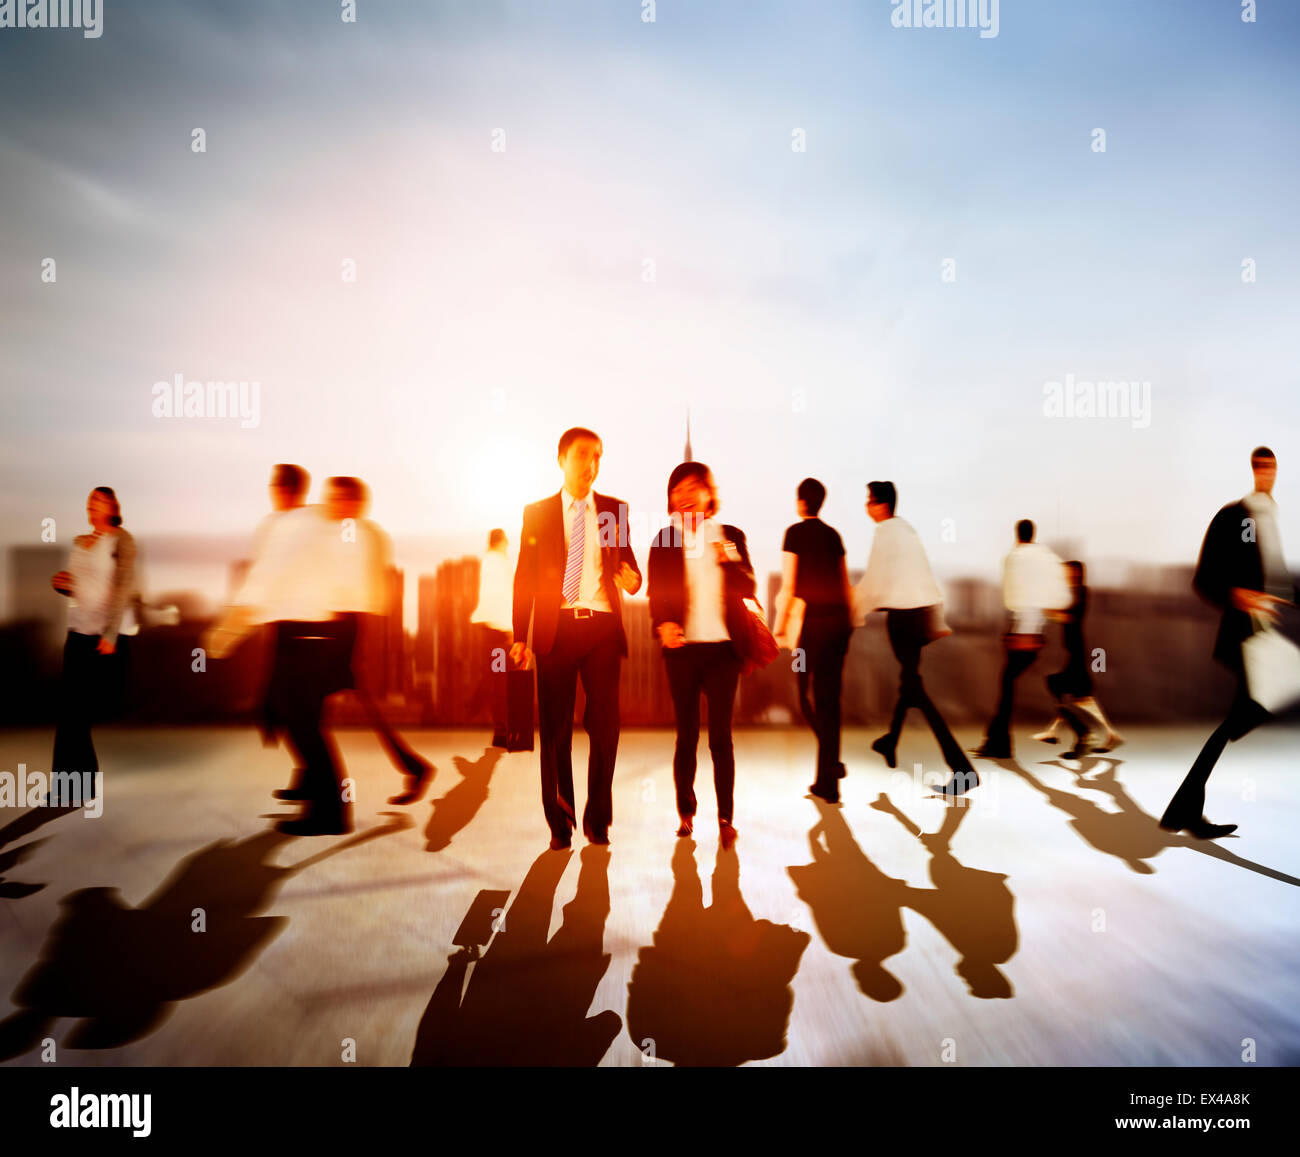 Business People Rush Hour Walking Commuting City Concept Stock Photo